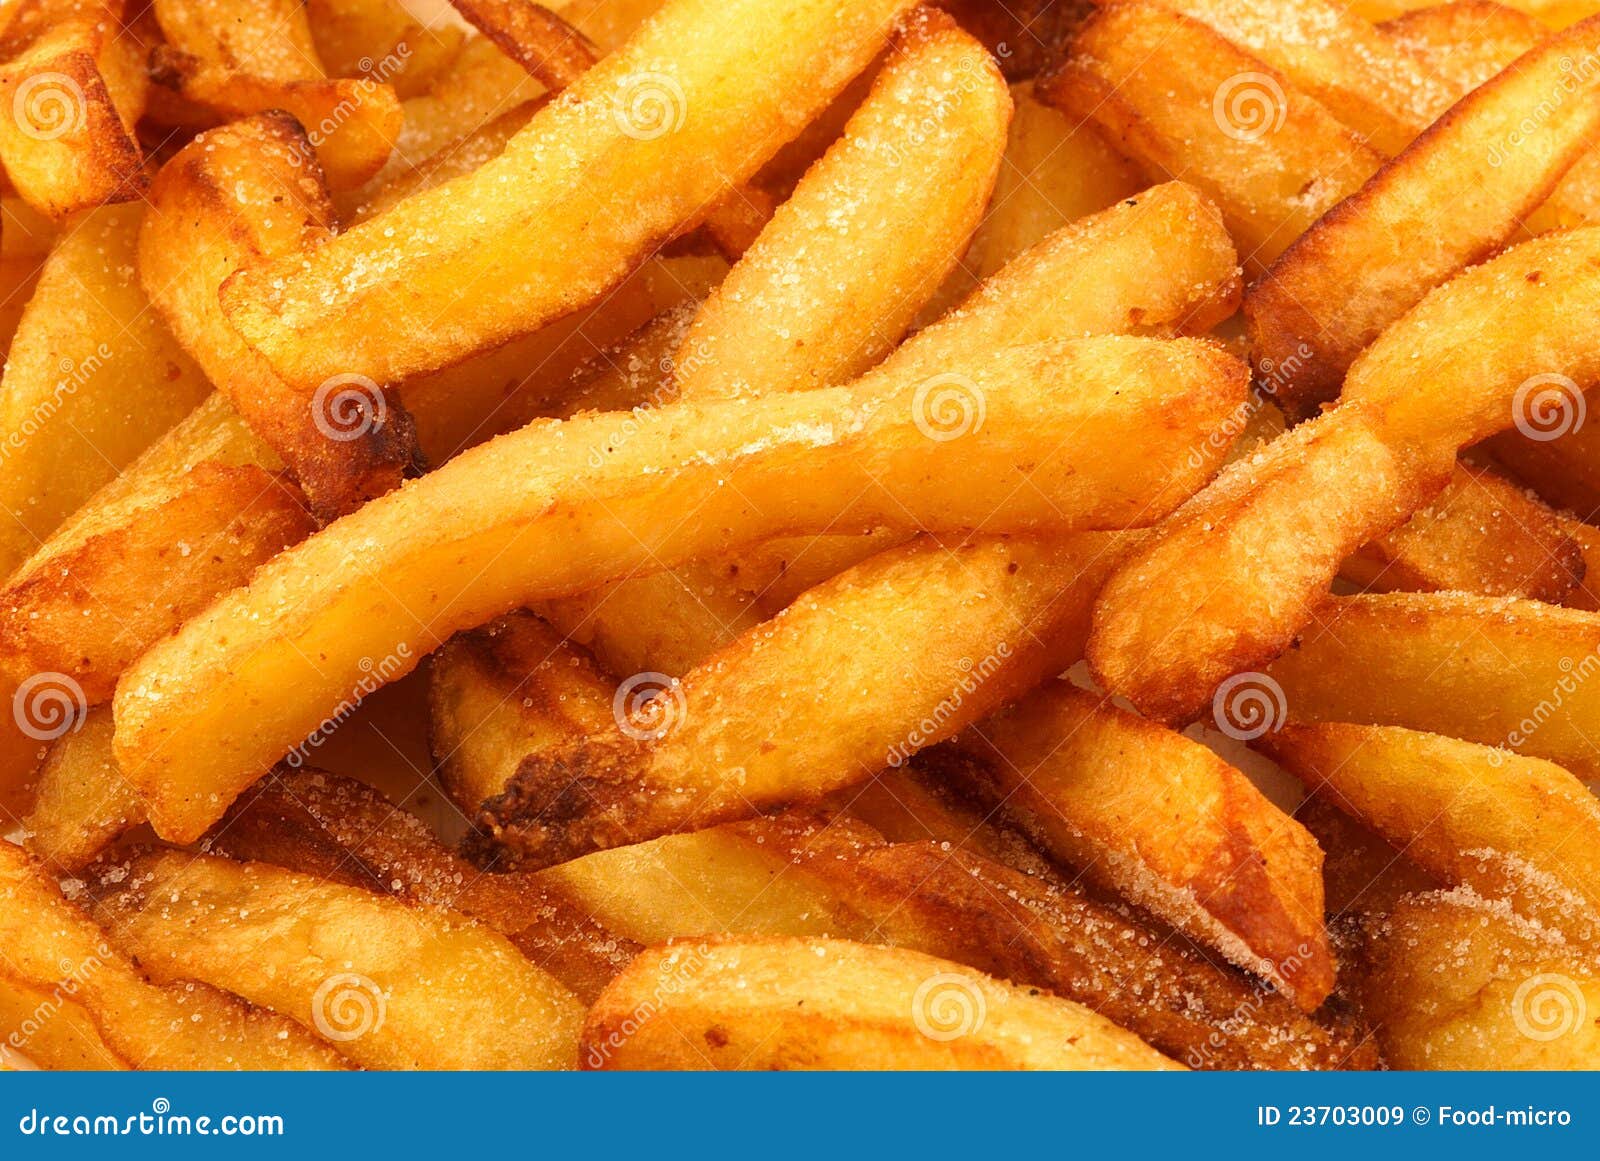 French fries stock image. Image of dish, apple, ingredient - 23703009